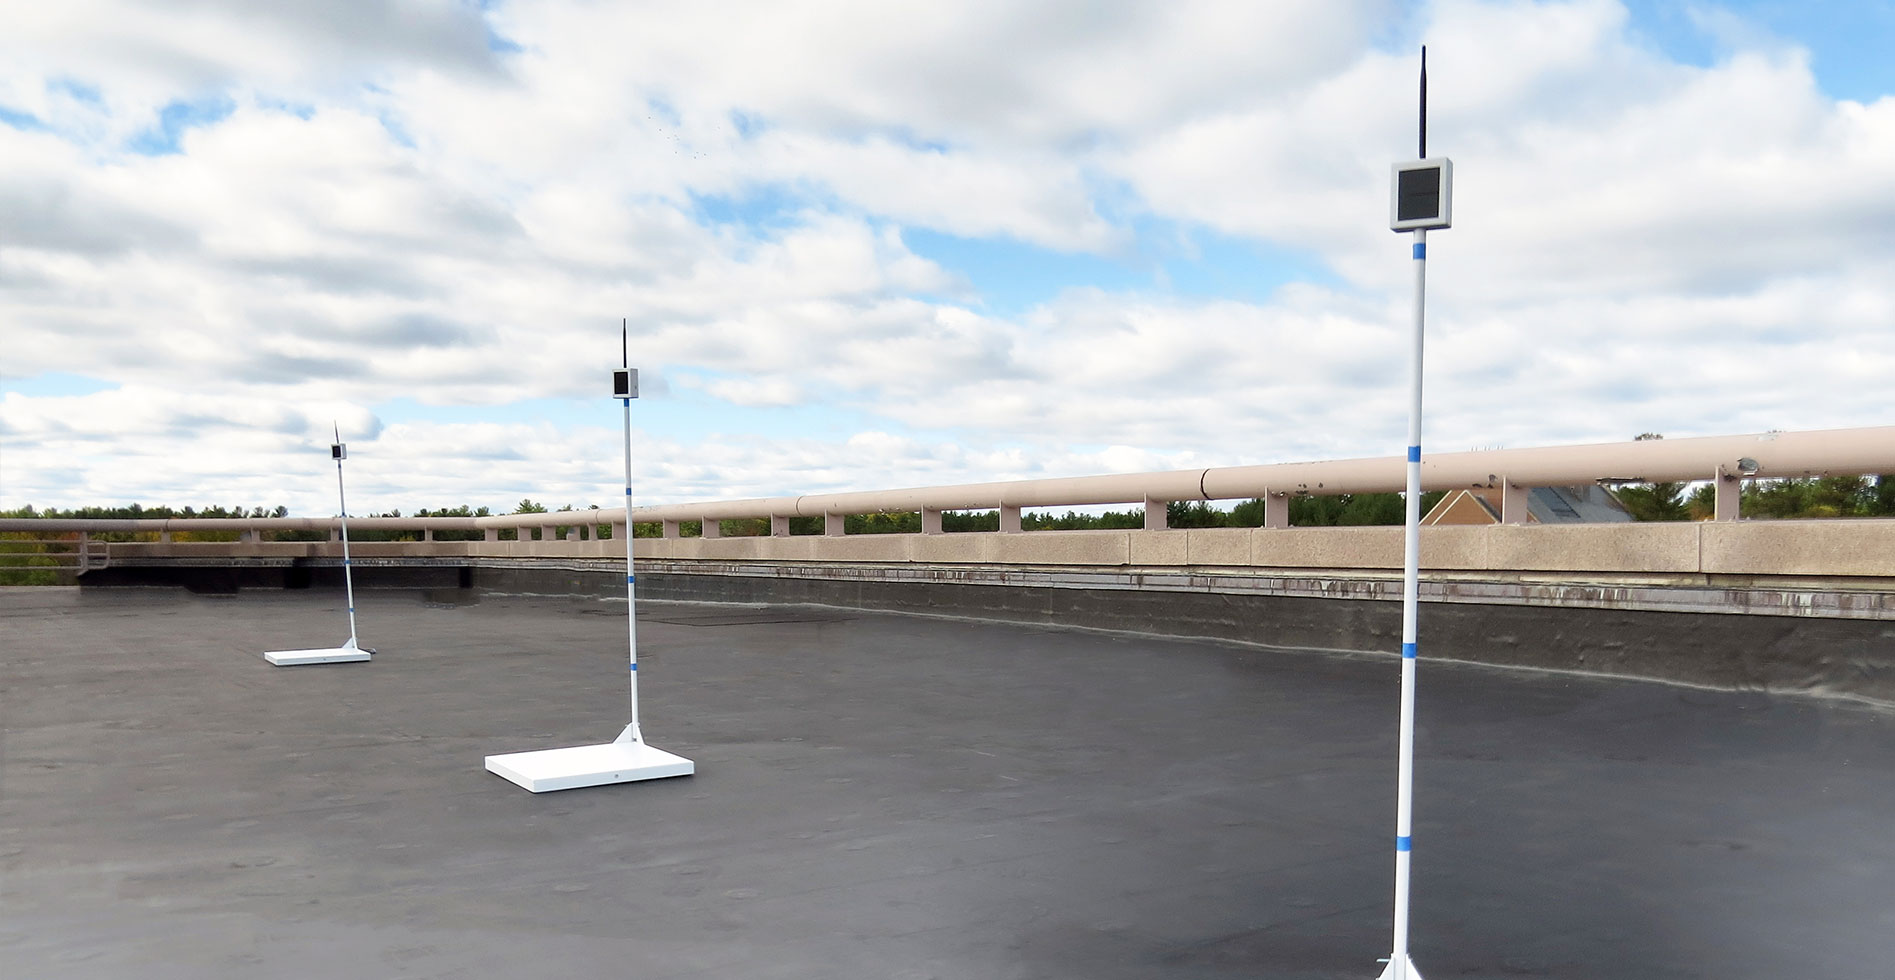 snow monitoring devices on a commercial flat roof